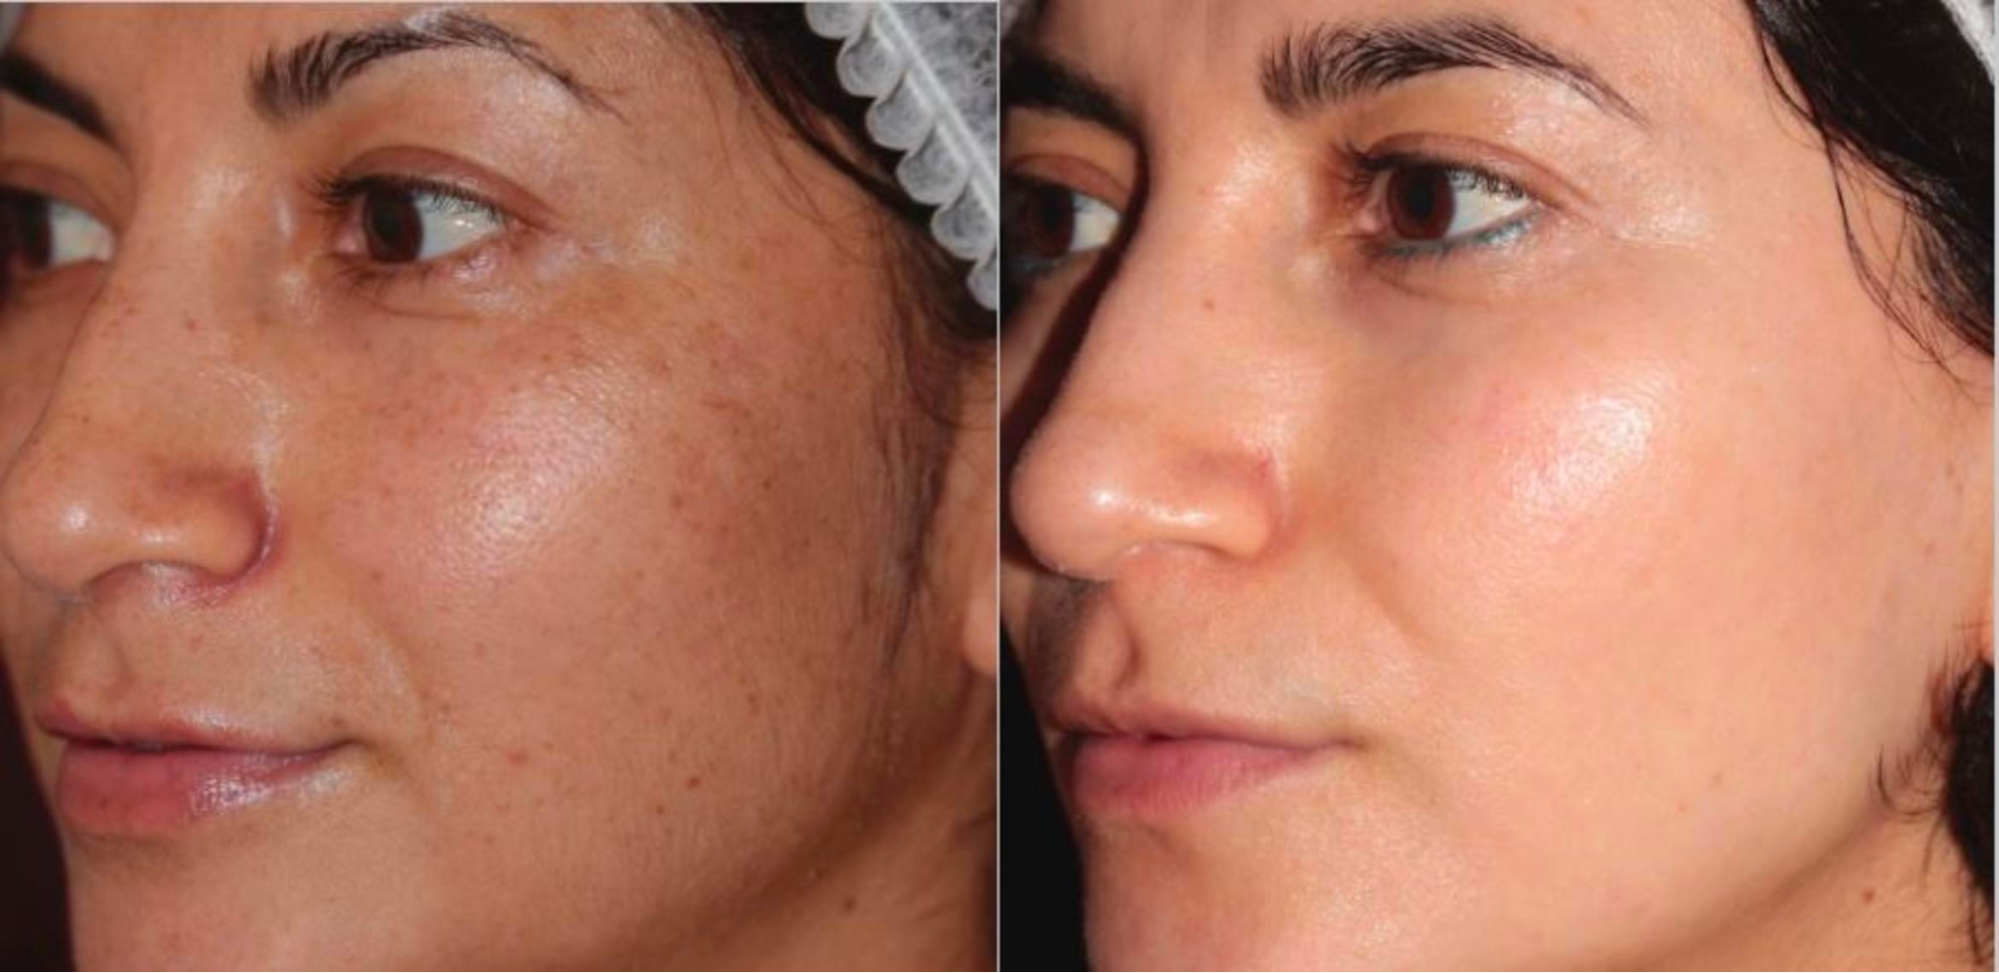 The result of using reVive light therapy for anti-aging